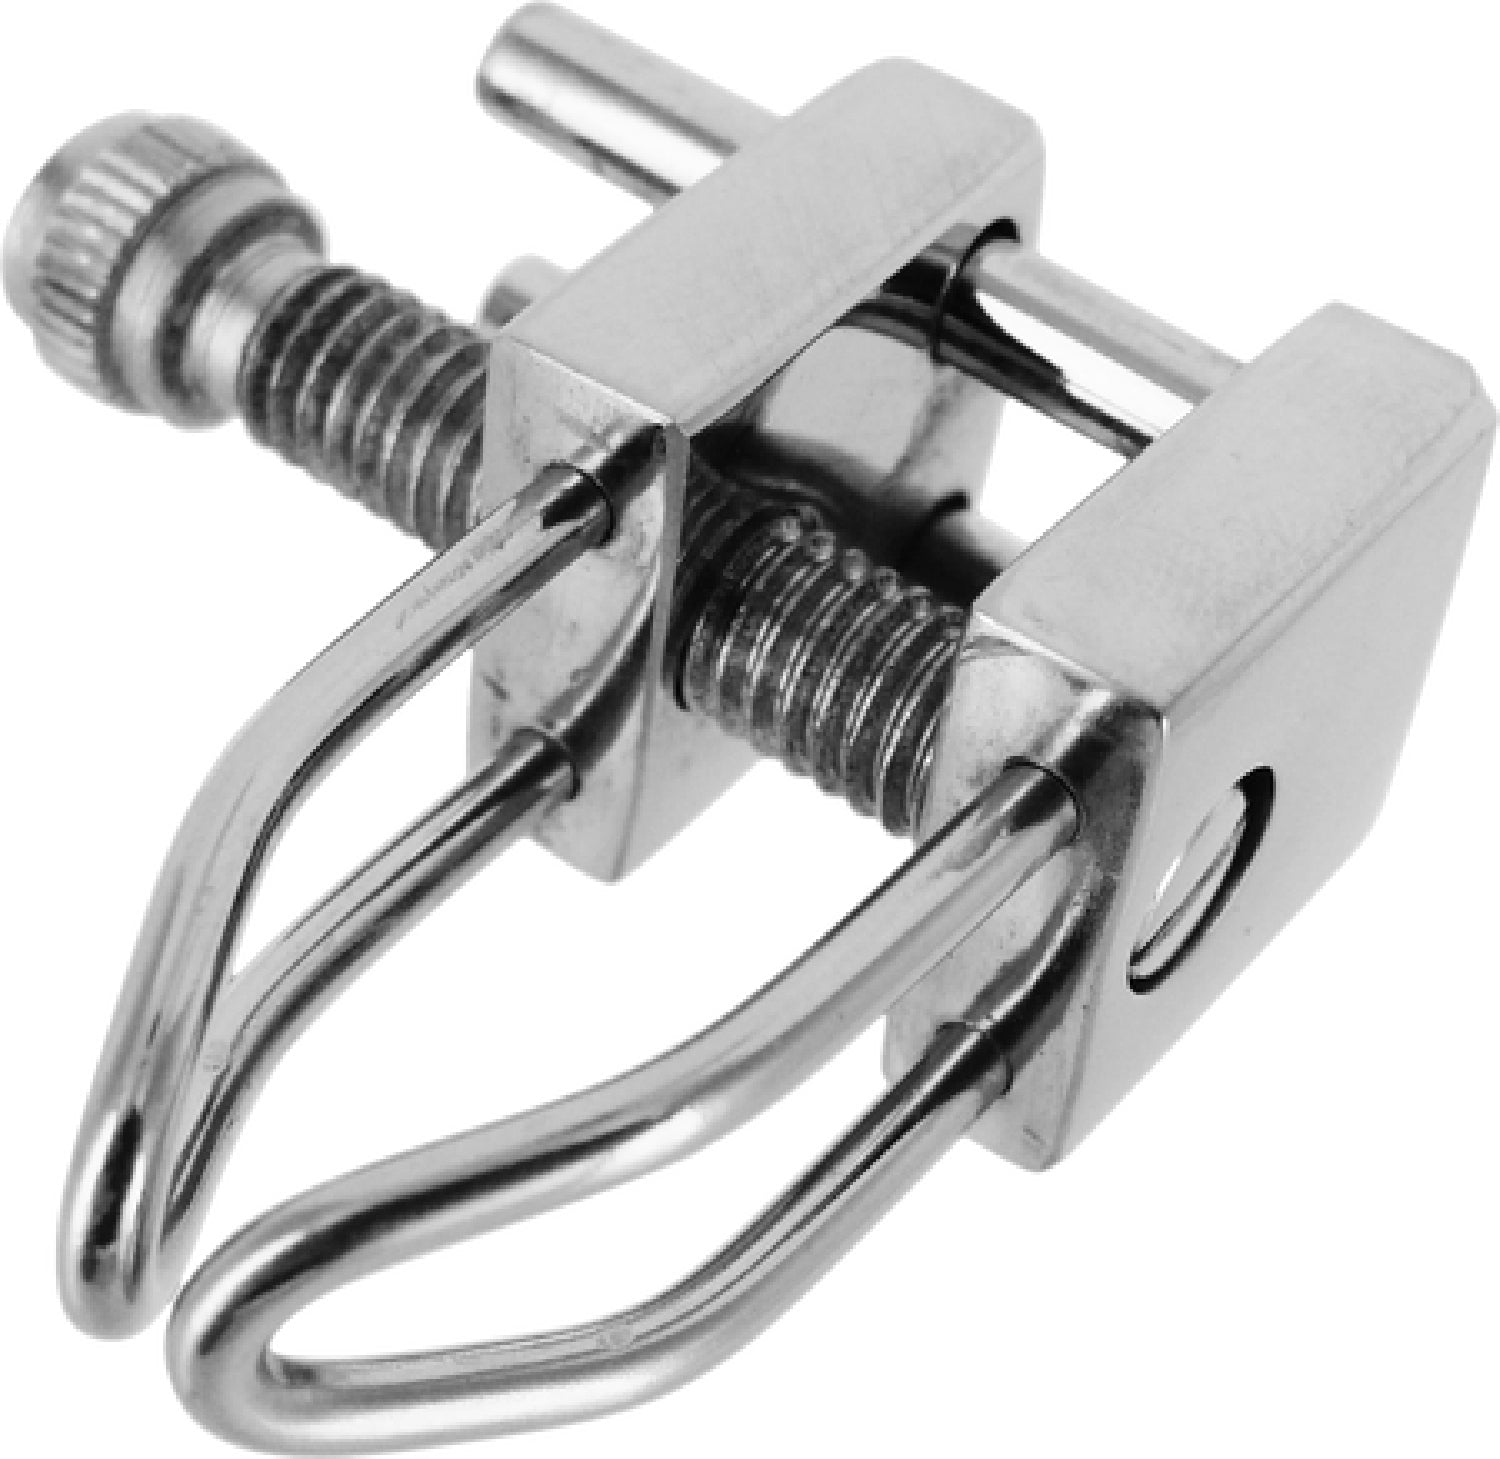 Nose Shackle Stainless Steel (Silver )  - Club X